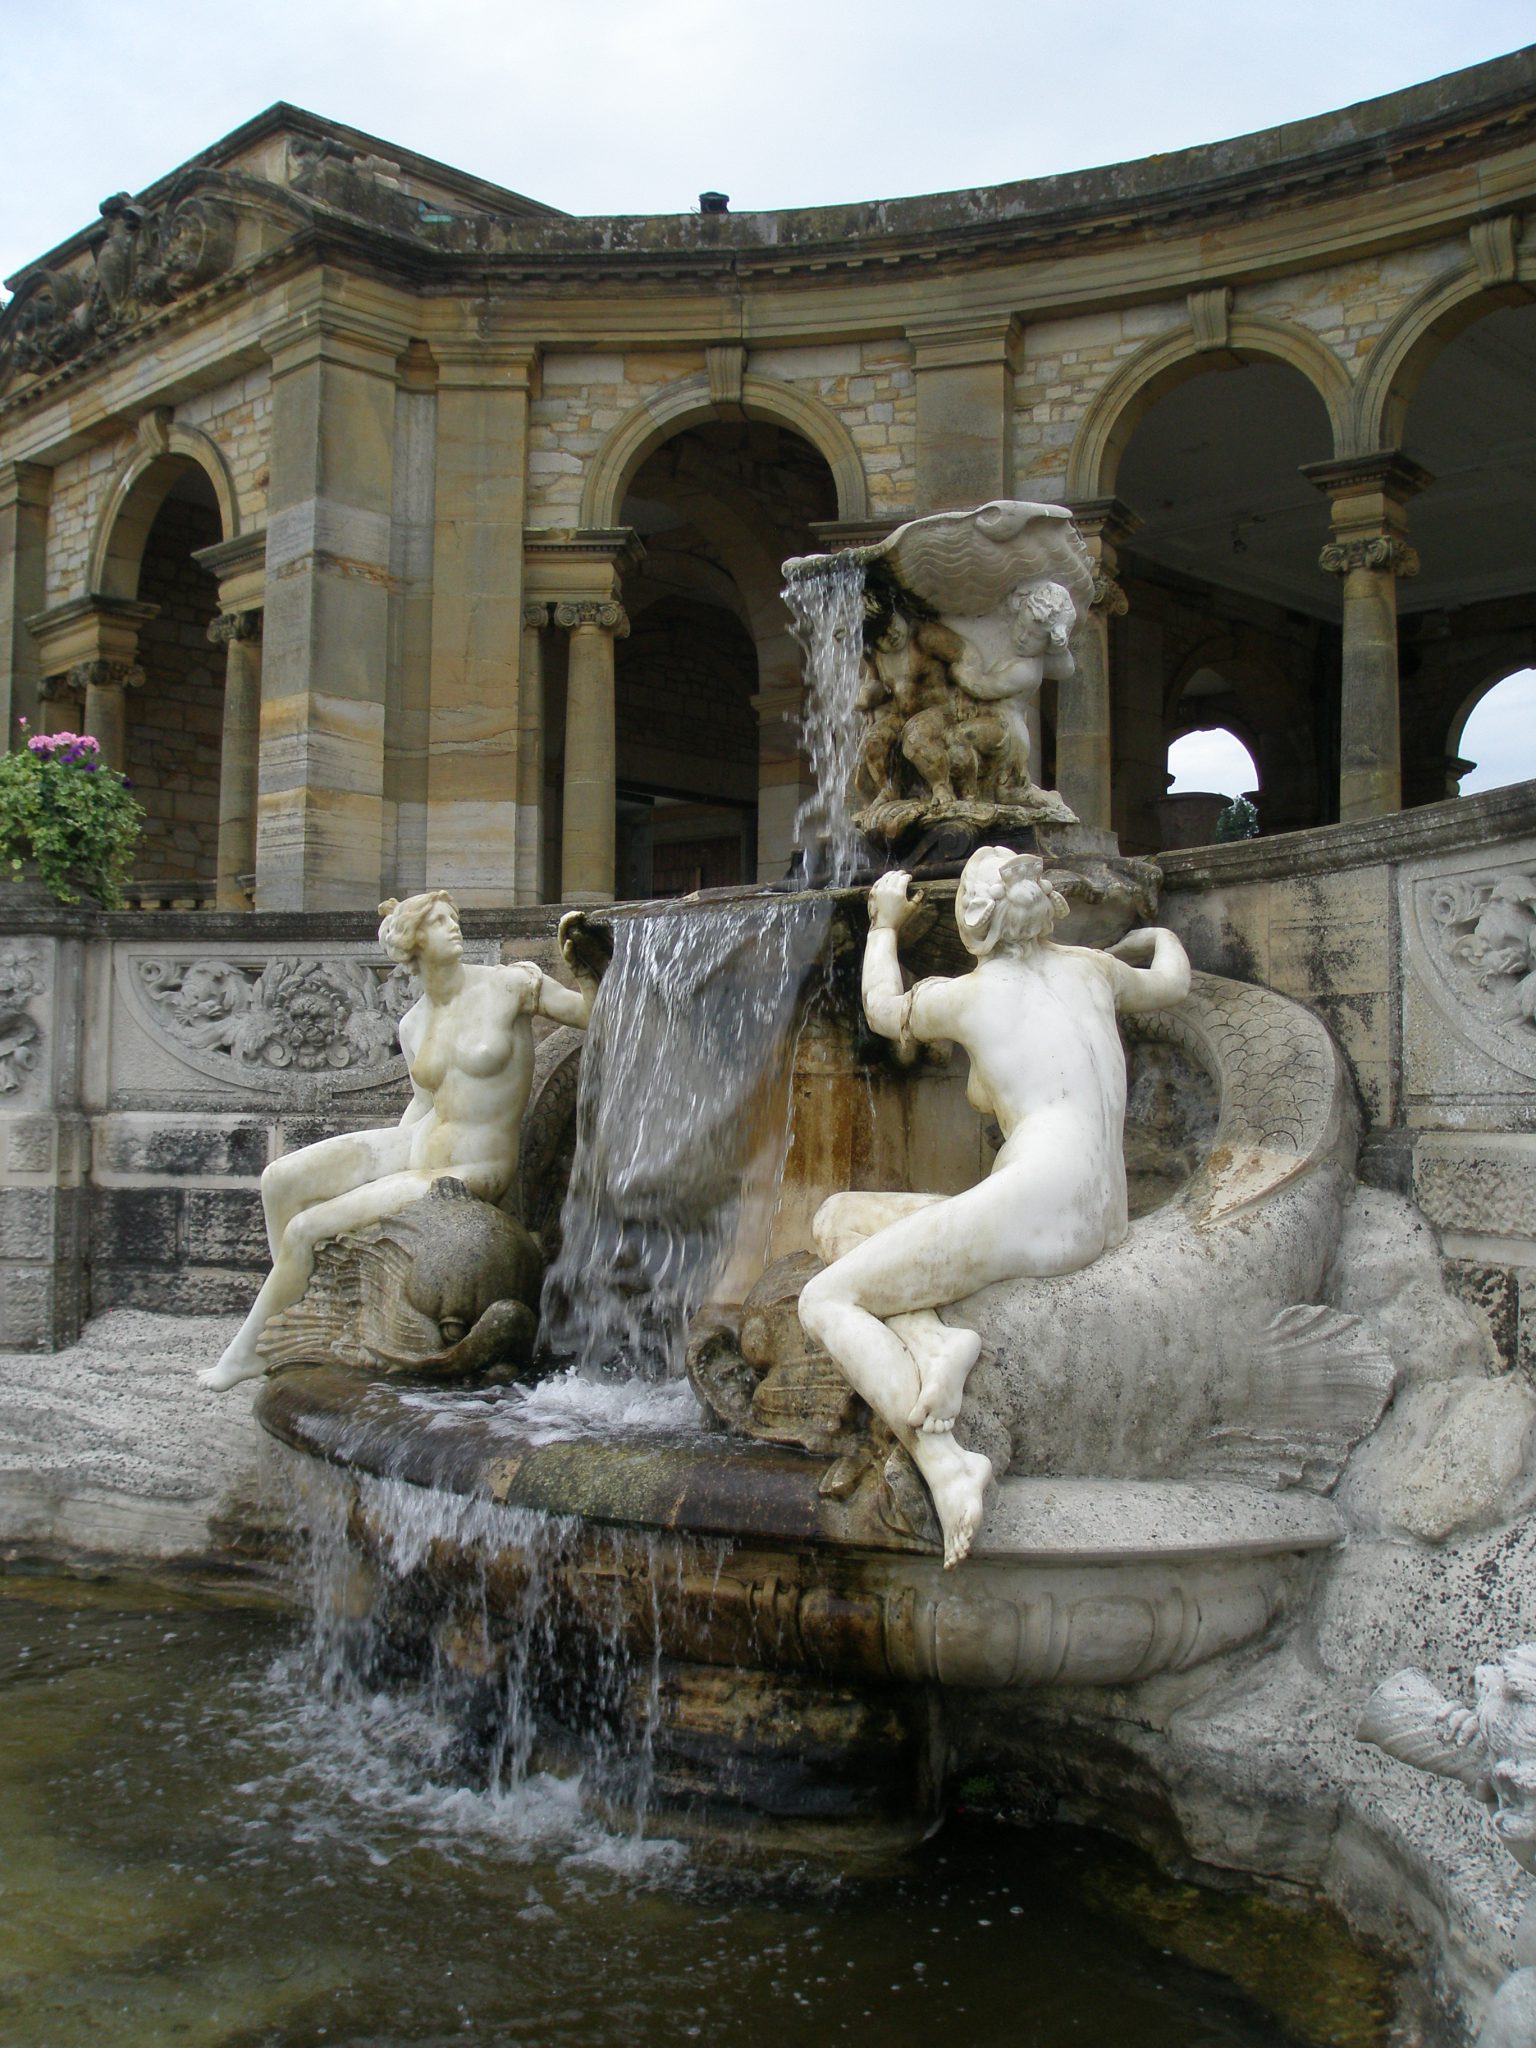 The Nymphs' Fountain was made in 1908 by W.S.Frith